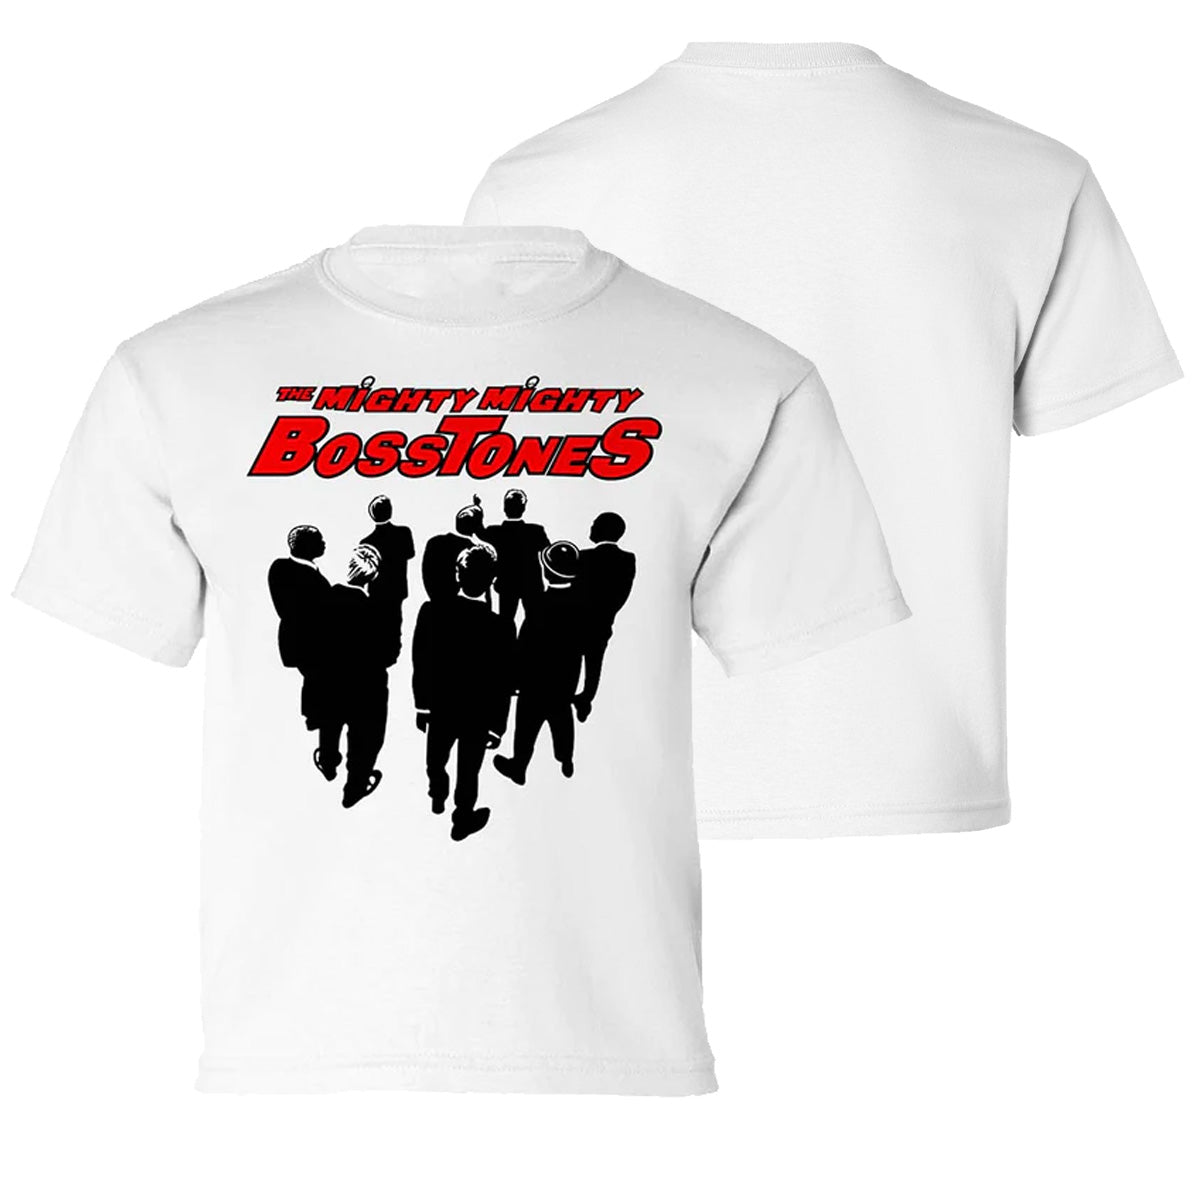 MIGHTY MIGHTY BOSSTONES Let's Face it Toddler T-Shirt